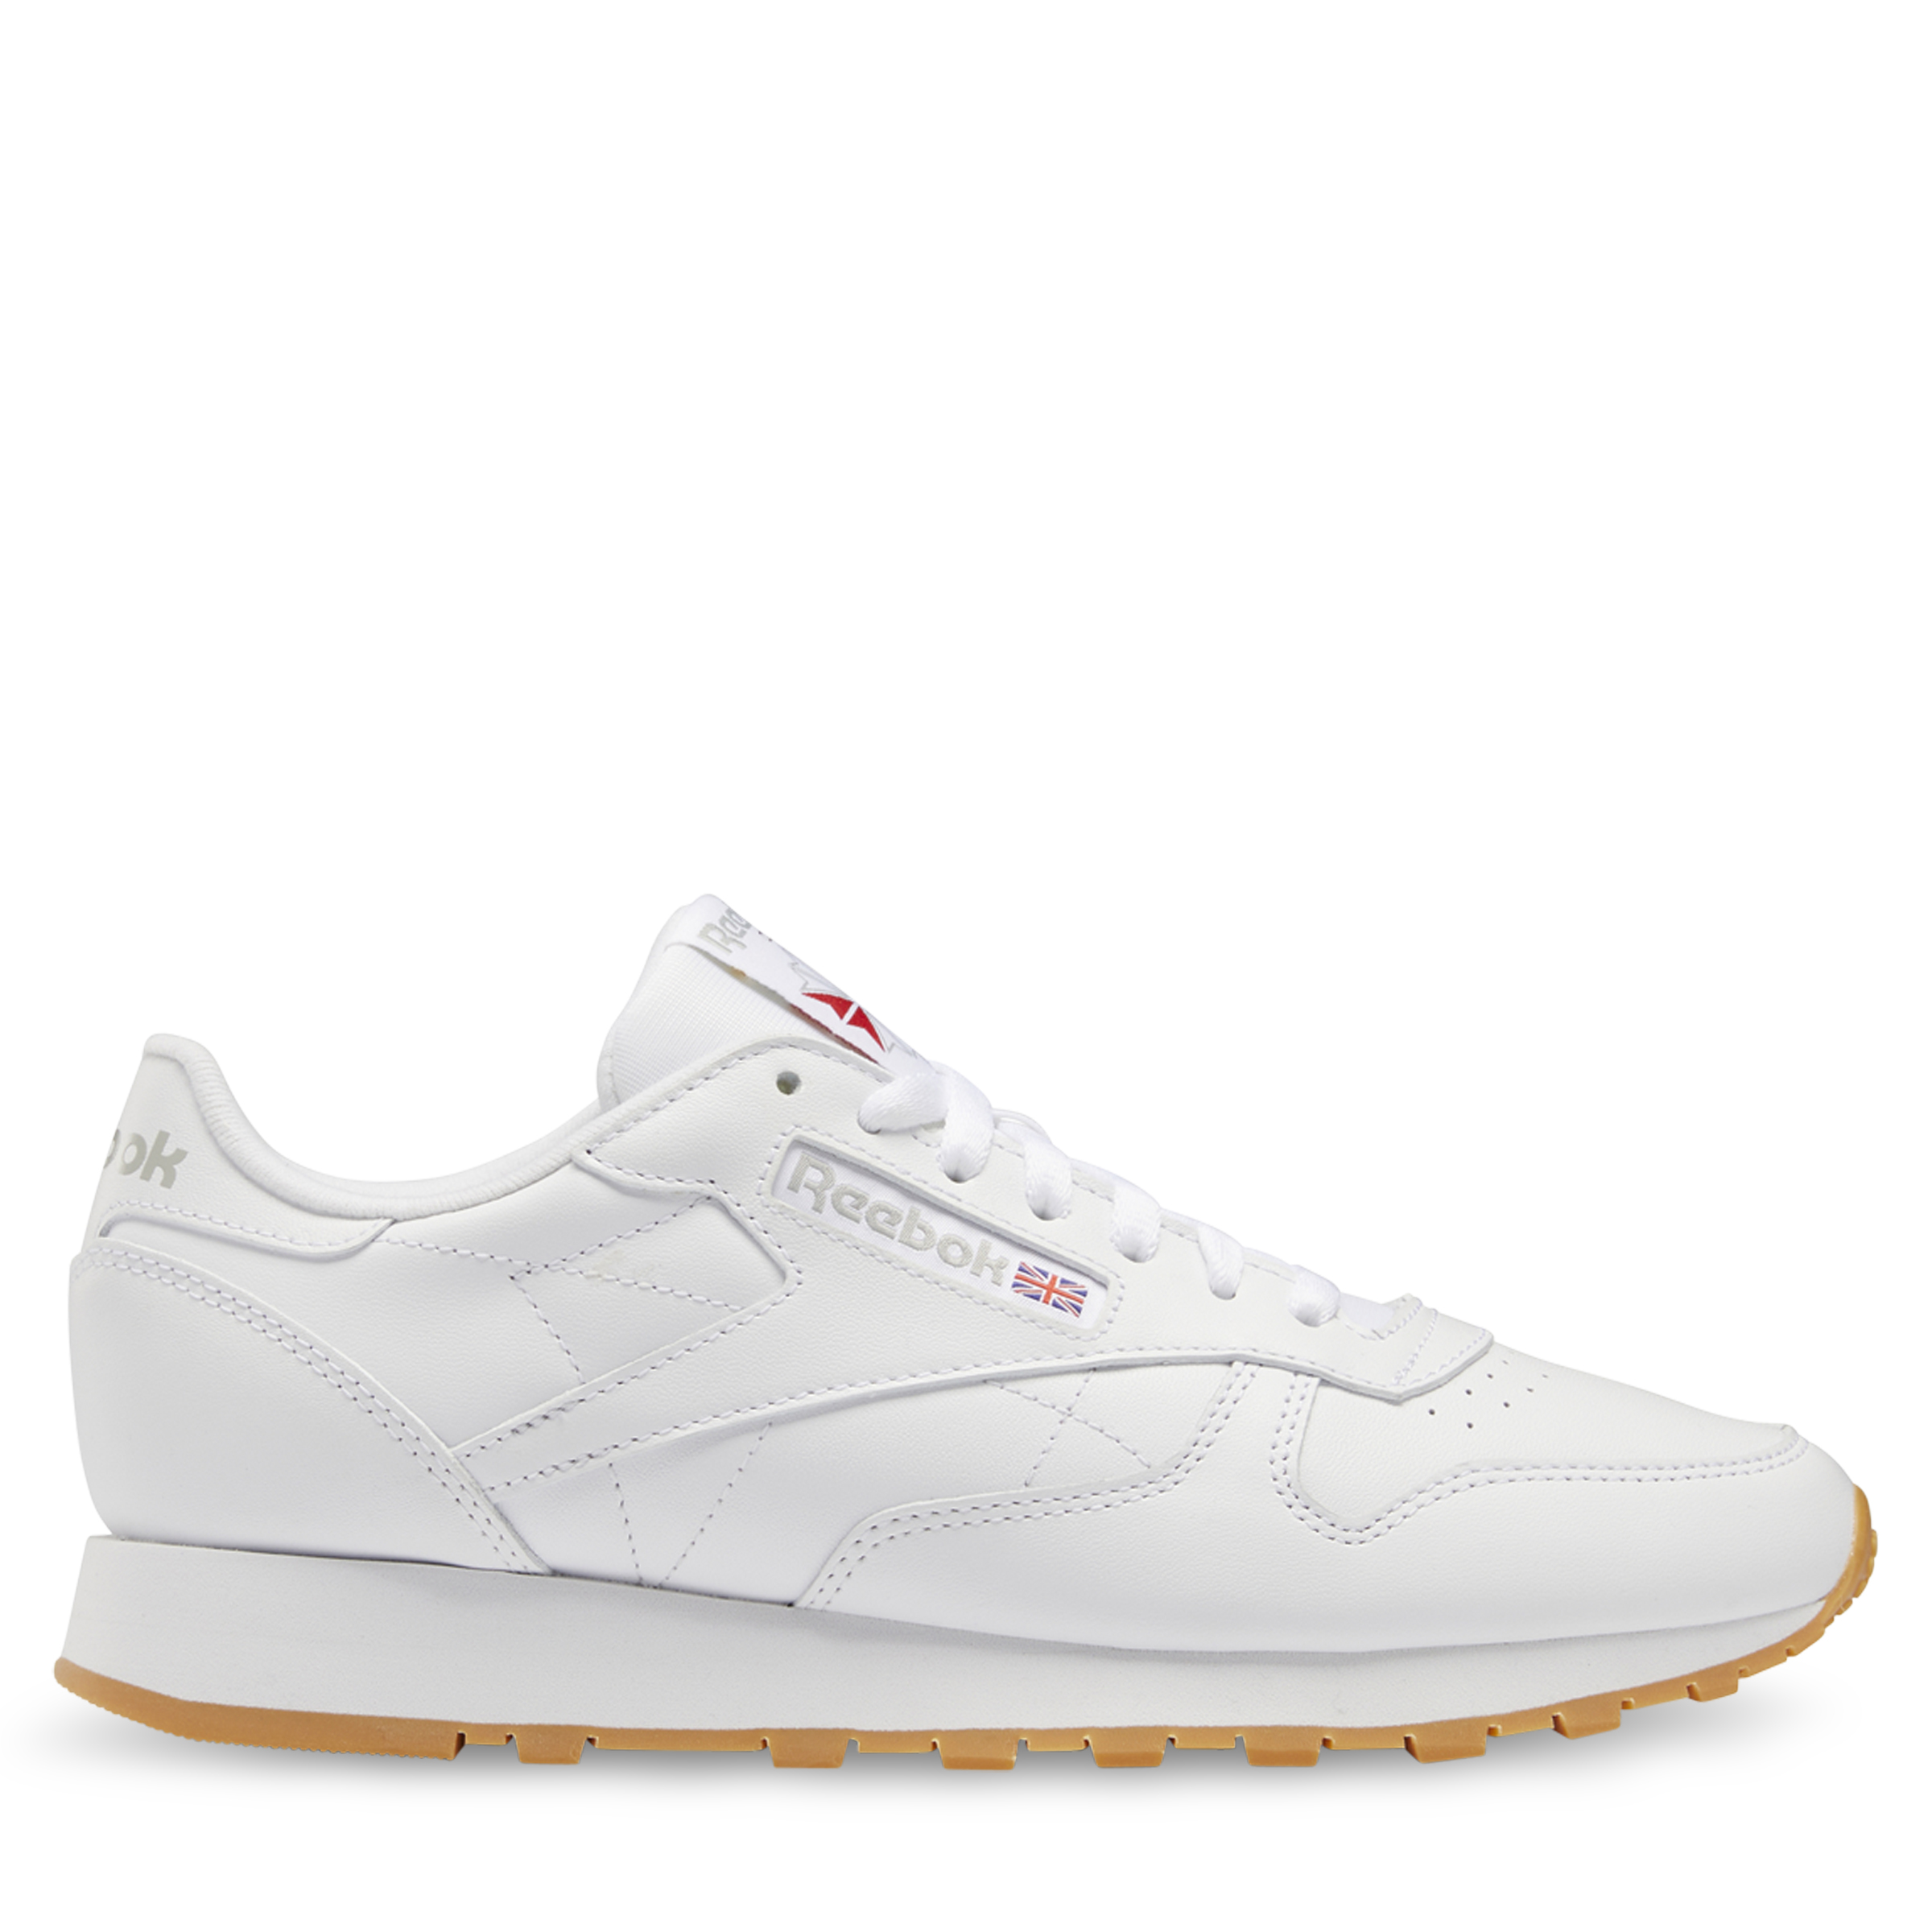 Reebok CLASSIC LEATHER | Hype DC